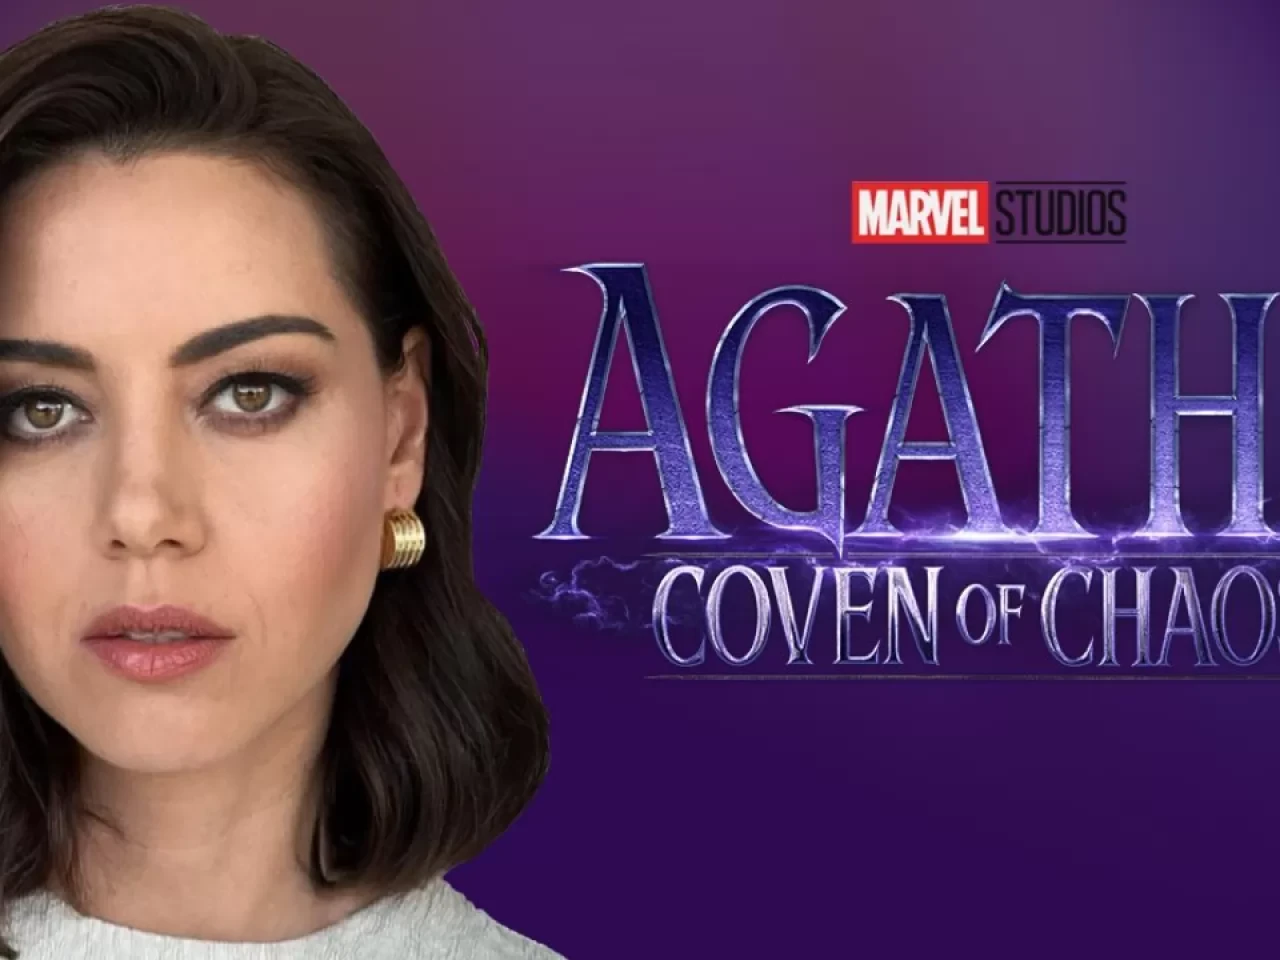 Aubrey Plaza will be making her Marvel debut